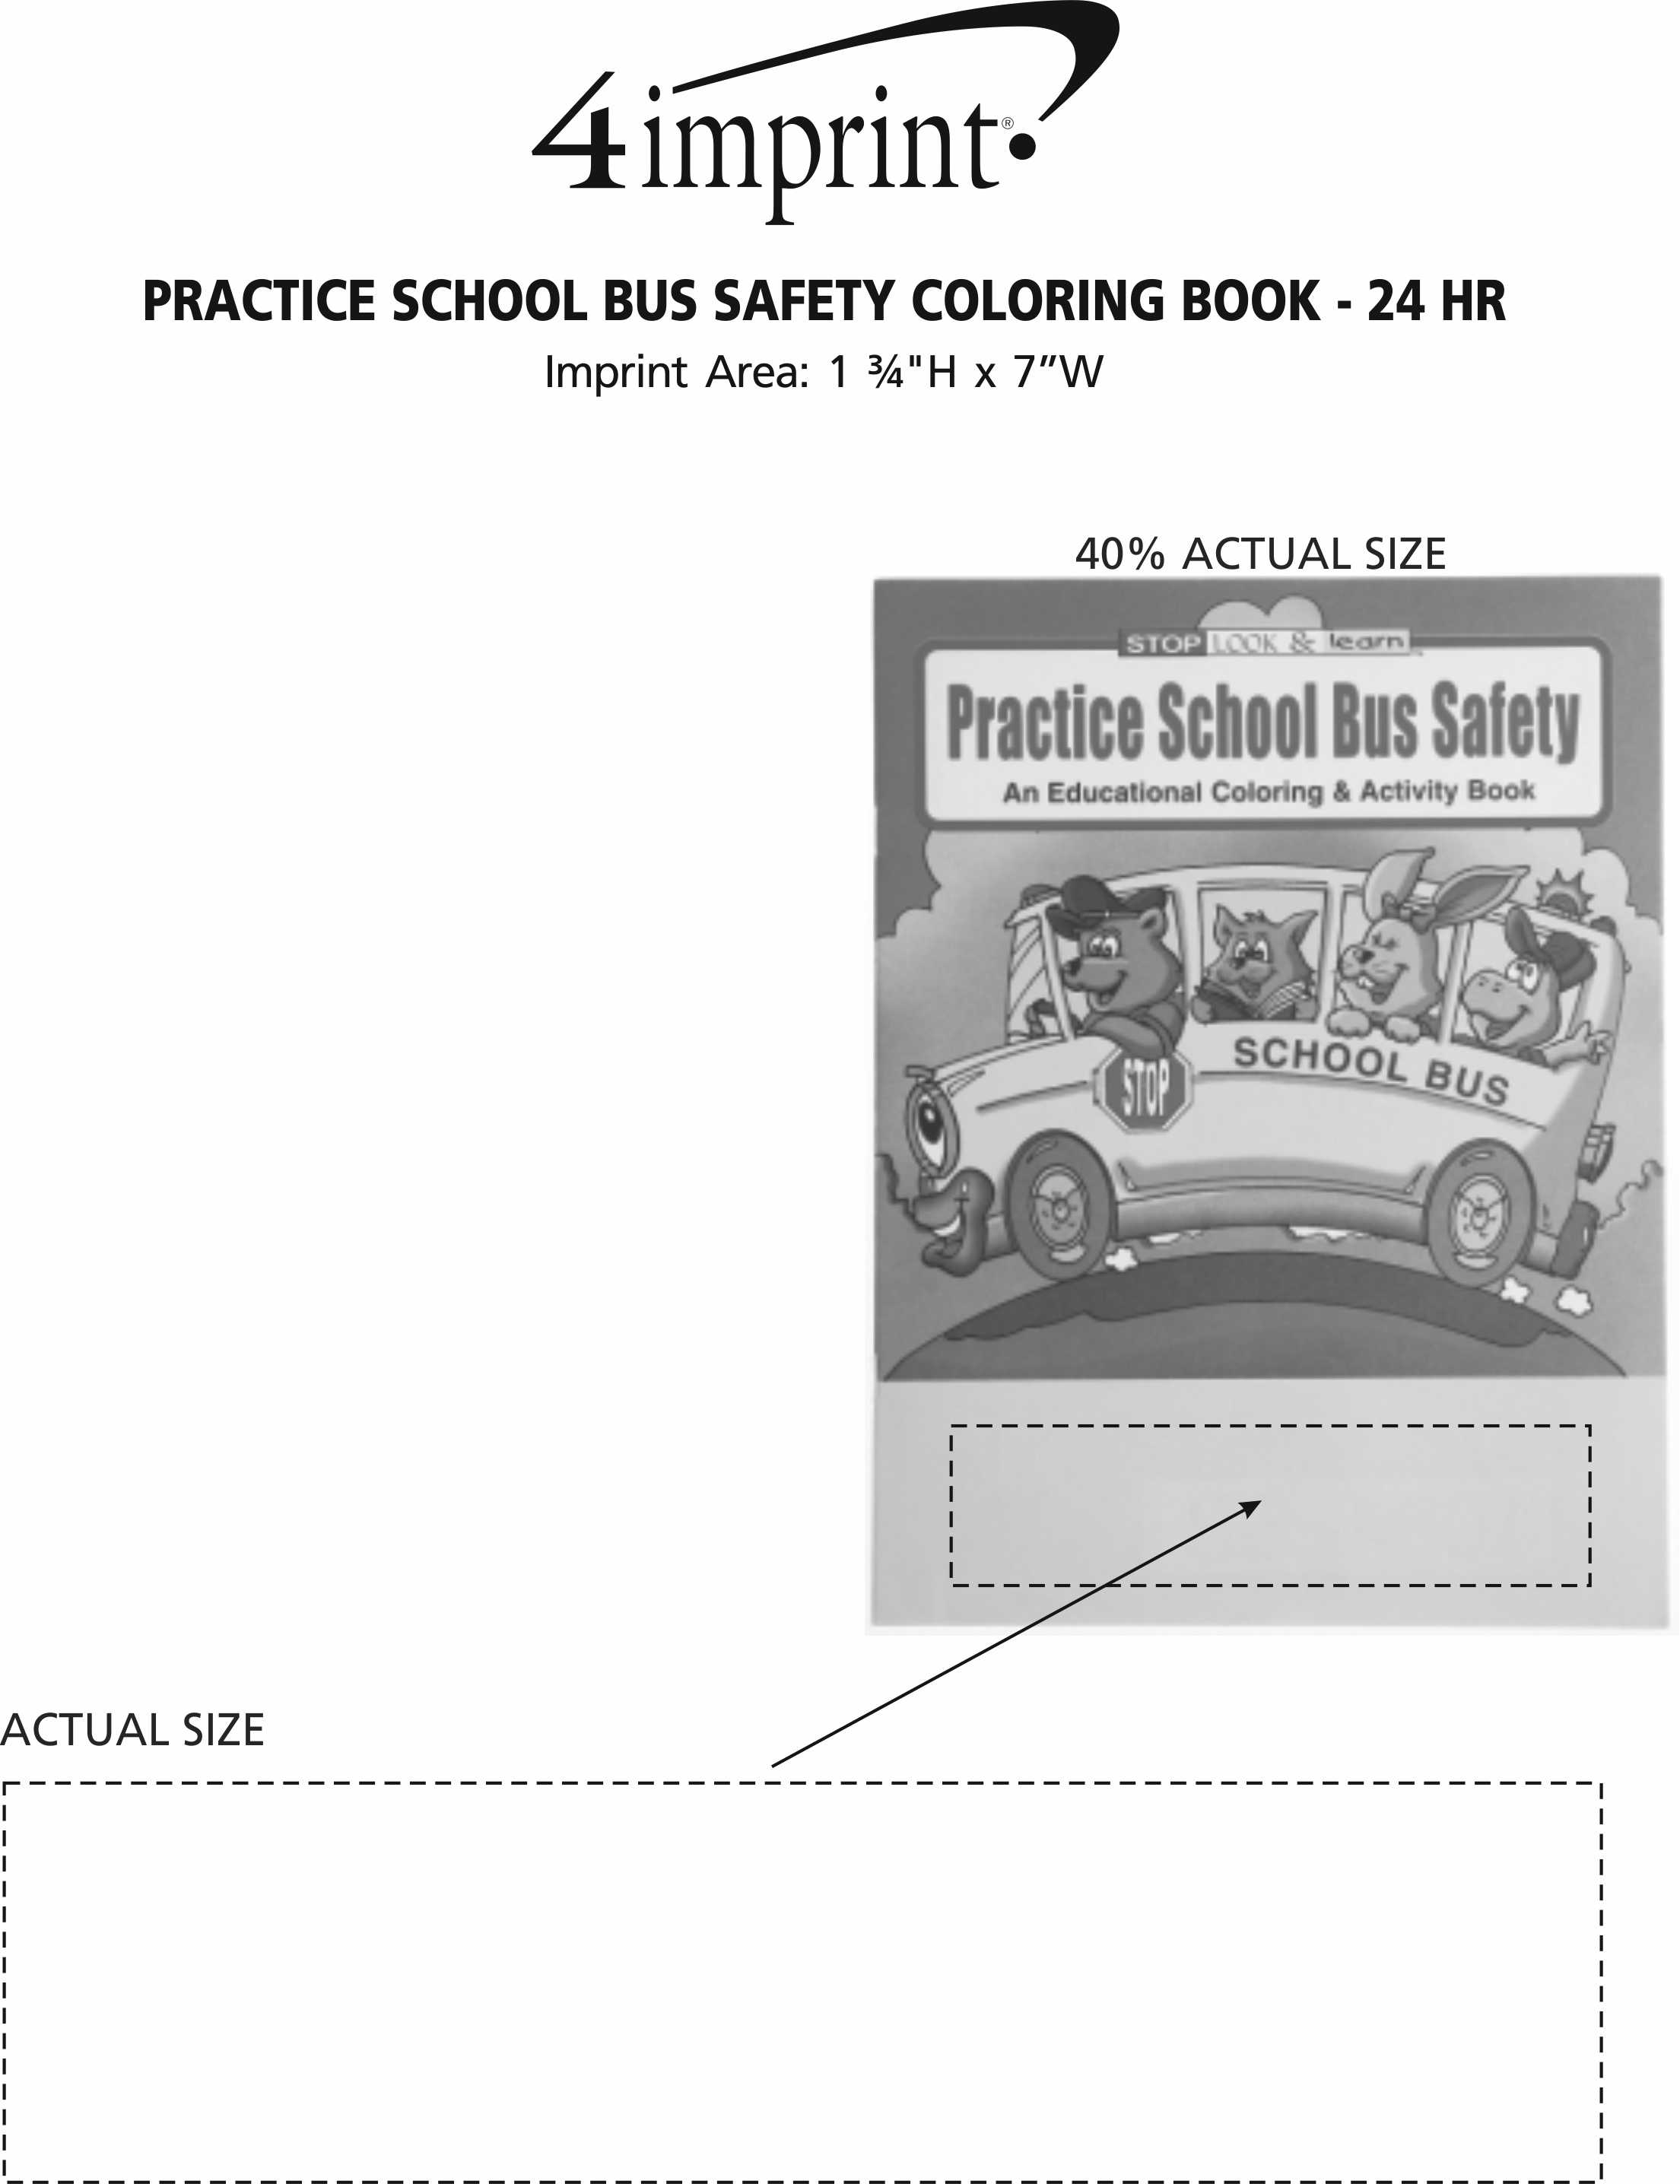 Imprint Area of Practice School Bus Safety Coloring Book - 24 hr